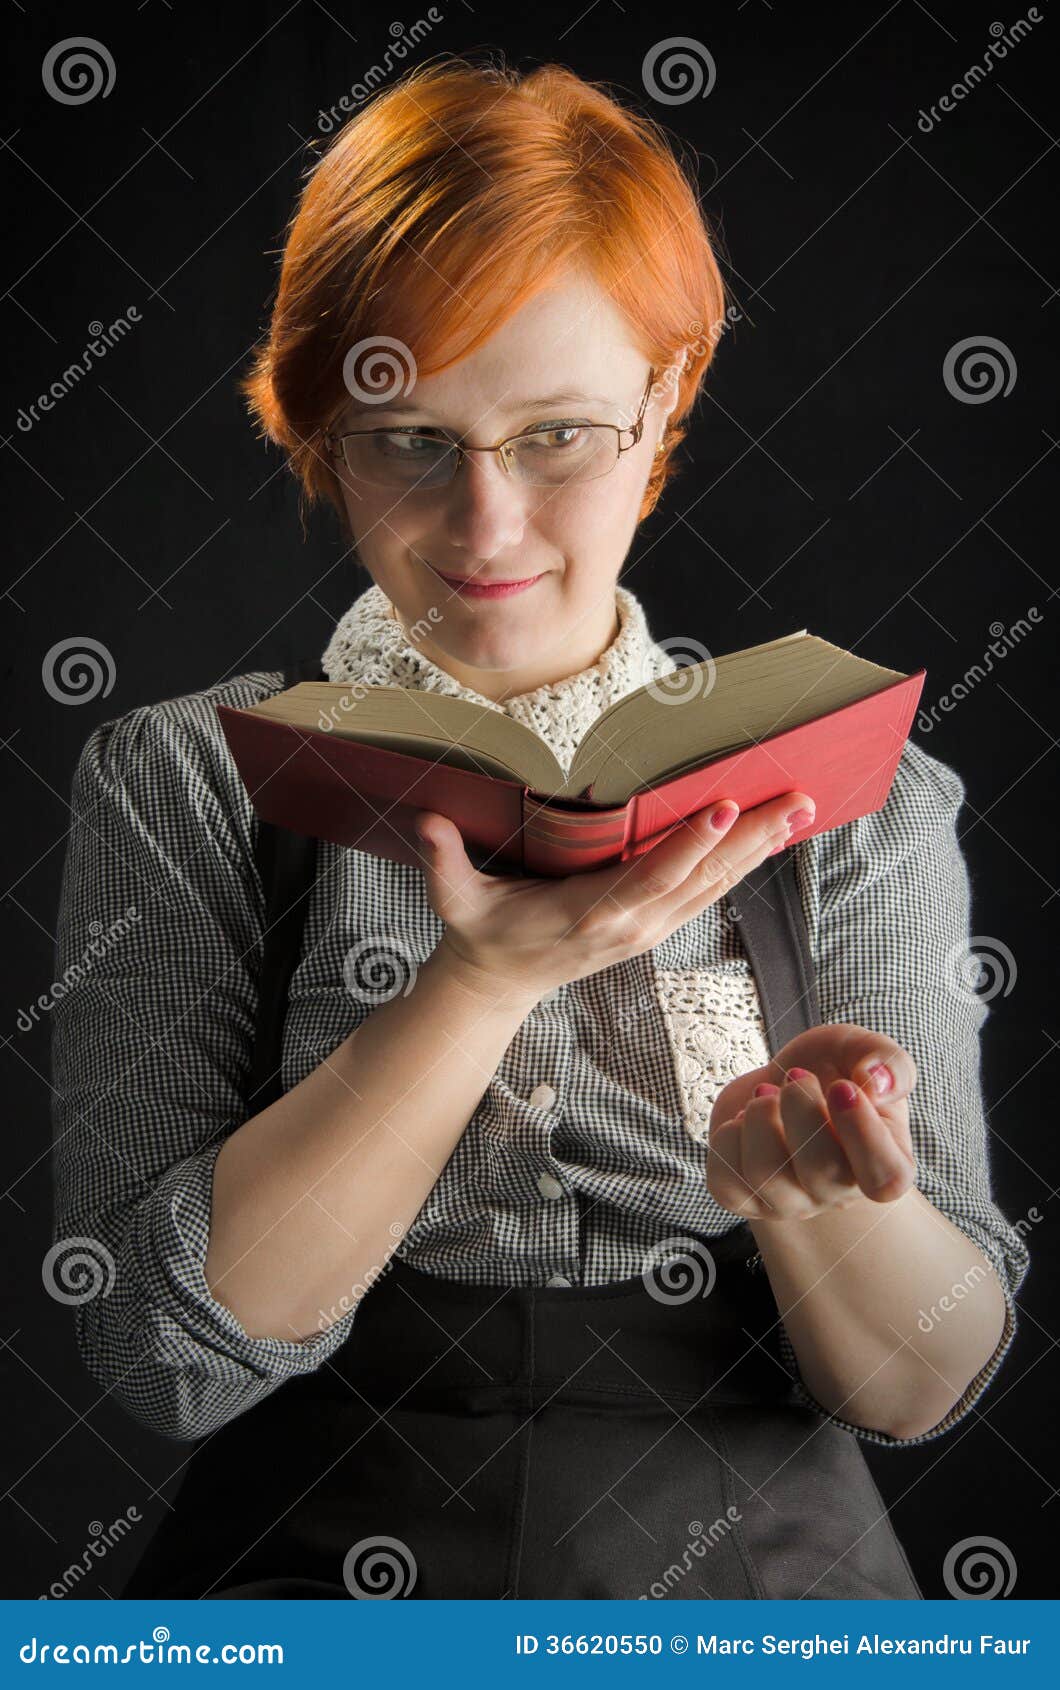 Young Woman Reading Book. Young woman with glasses reading a book against a black background